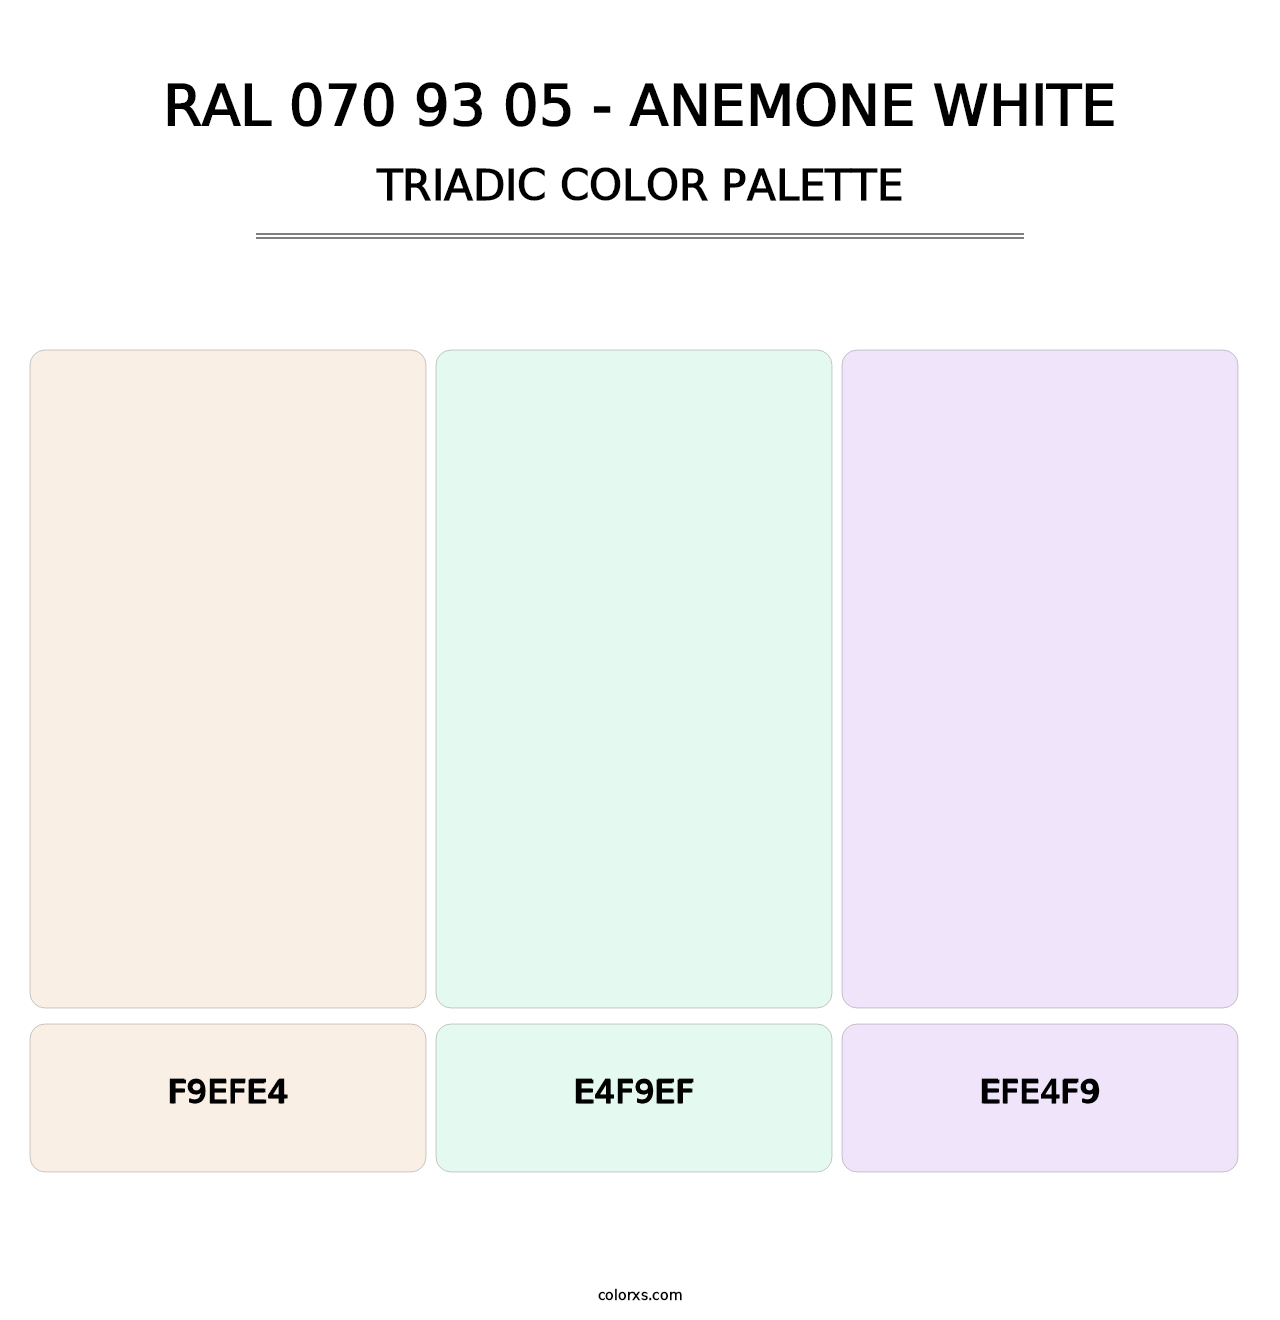 RAL 070 93 05 - Anemone White - Triadic Color Palette